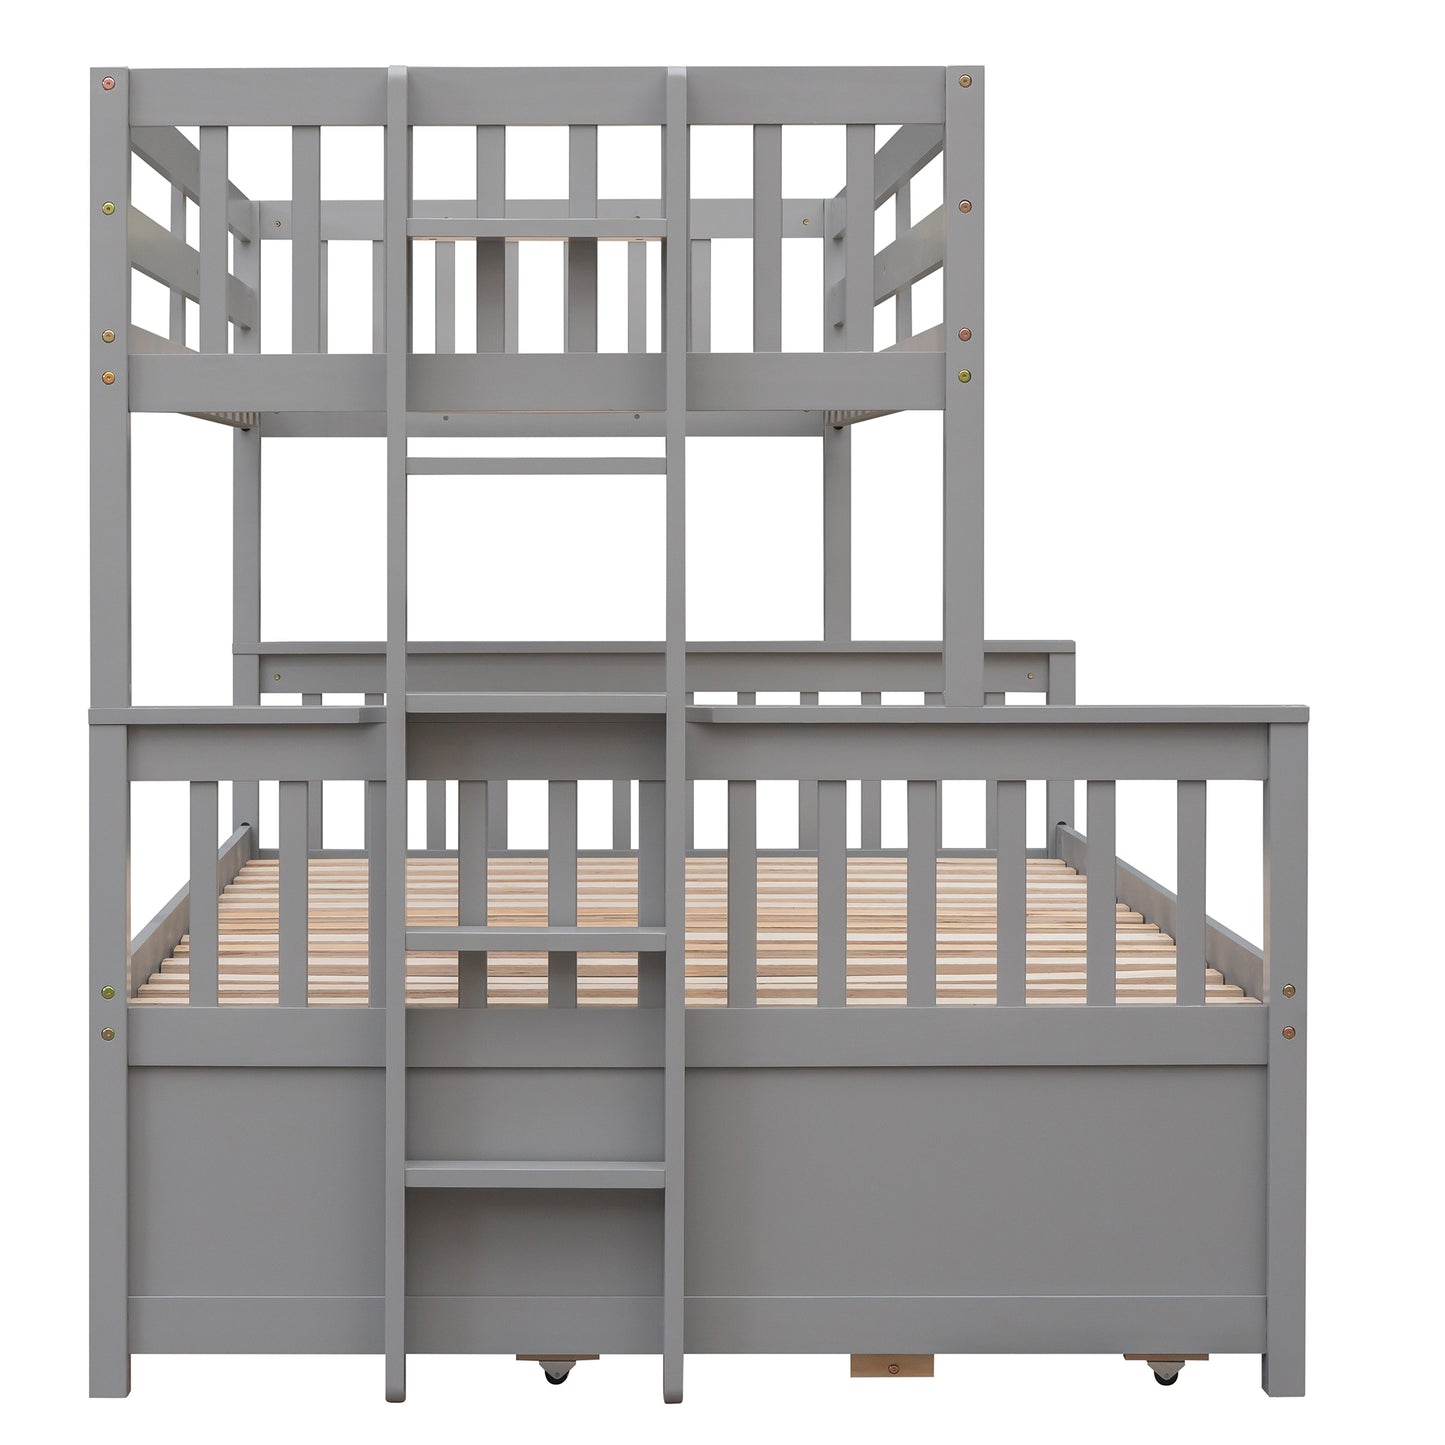 Twin-Over-Full Bunk Bed with Twin size Trundle , Separable Bunk Bed with Drawers for Bedroom - Gray